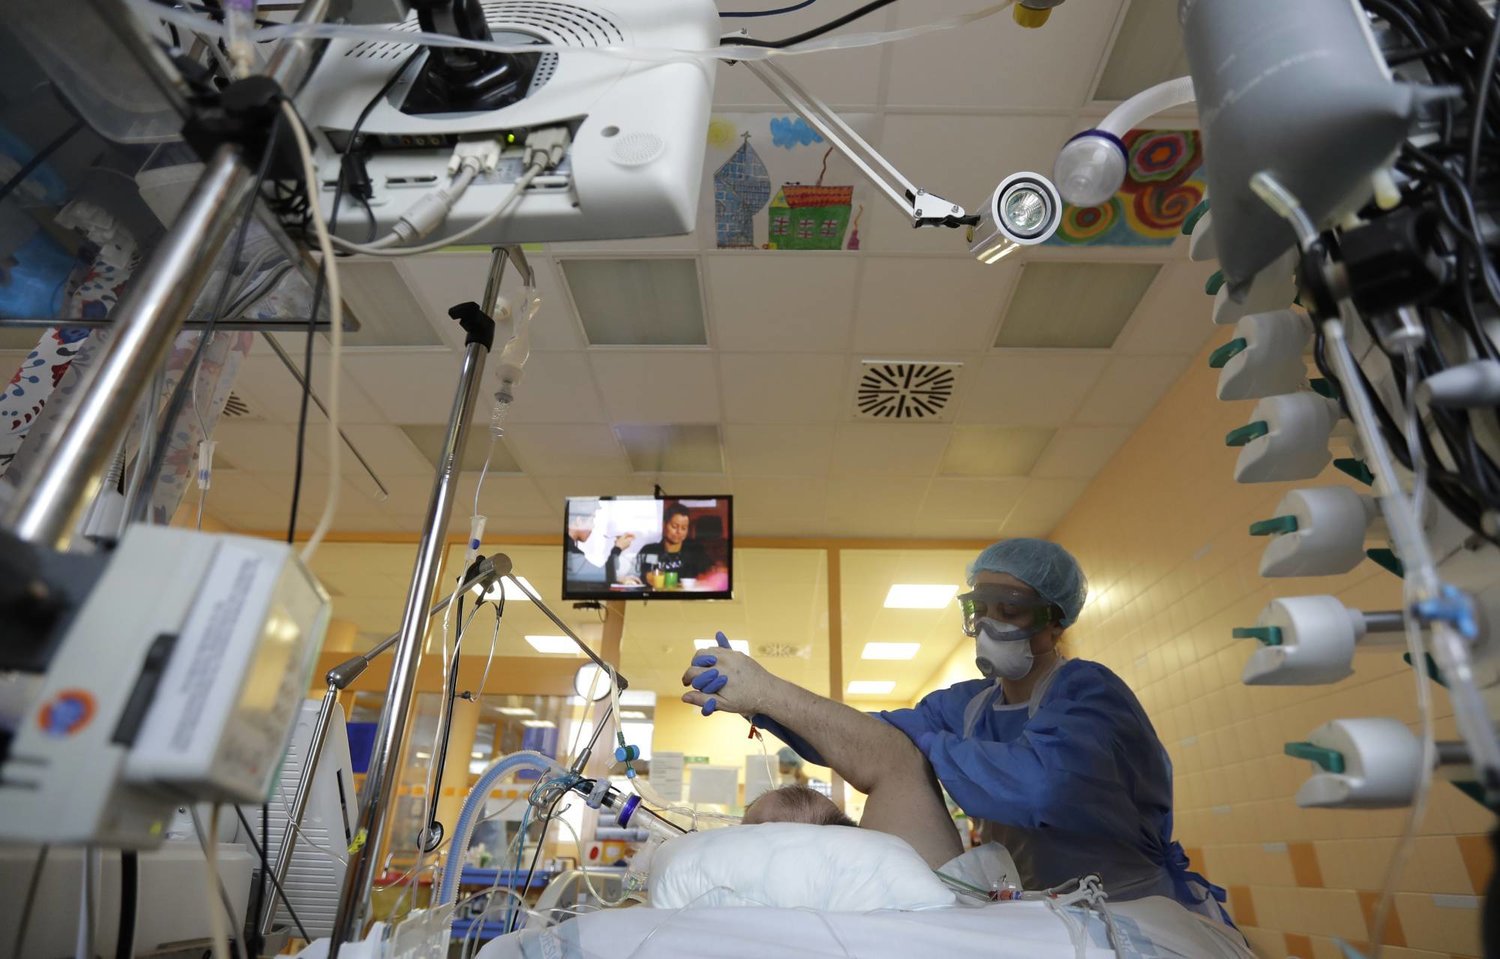  A health care worker attends to a COVID-19 patient in an
intensive care unit at the General University Hospital in Prague on
Tuesday. | AP